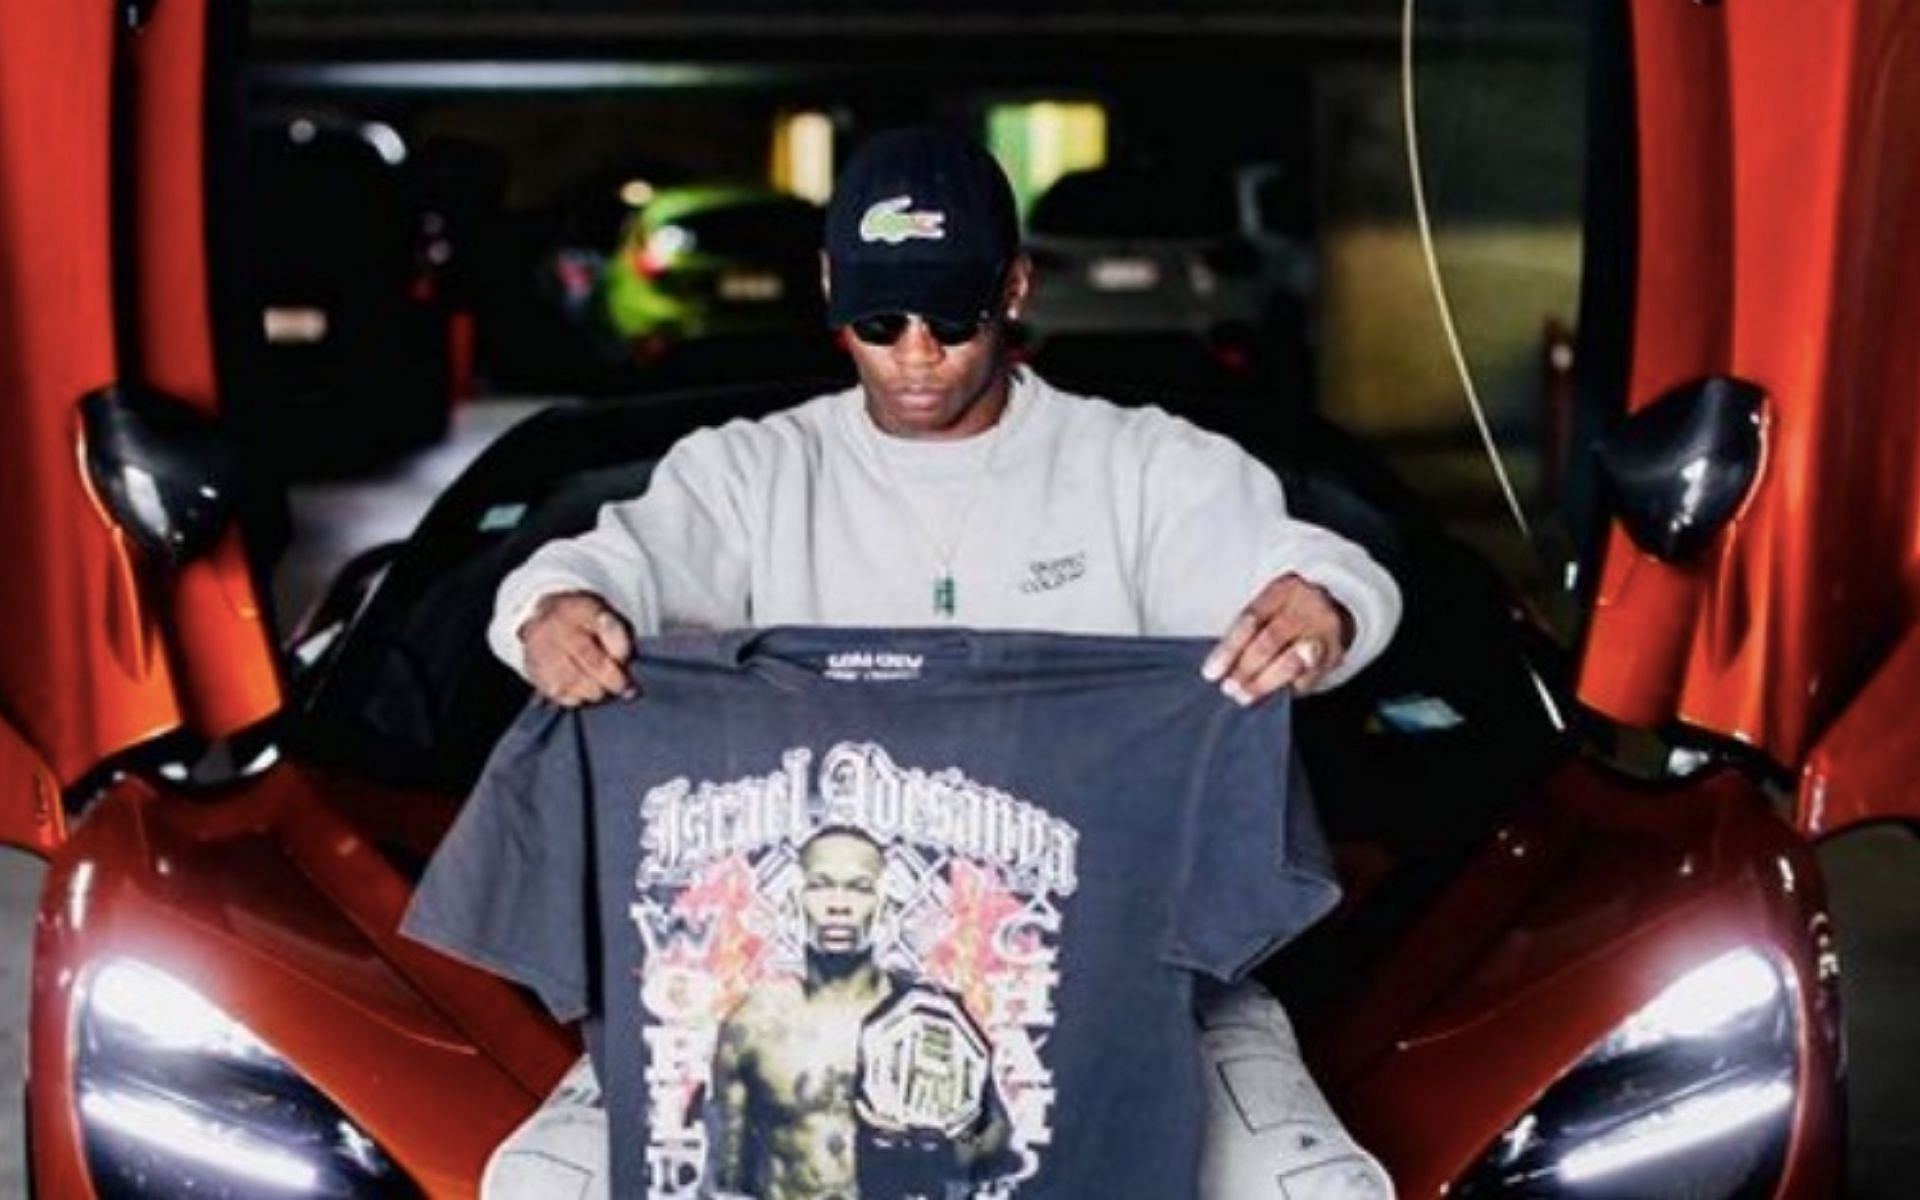 Israel Adesanya has spoken about why he bought a McLaren instead of a Lamborghini as he first began his rise to prominence